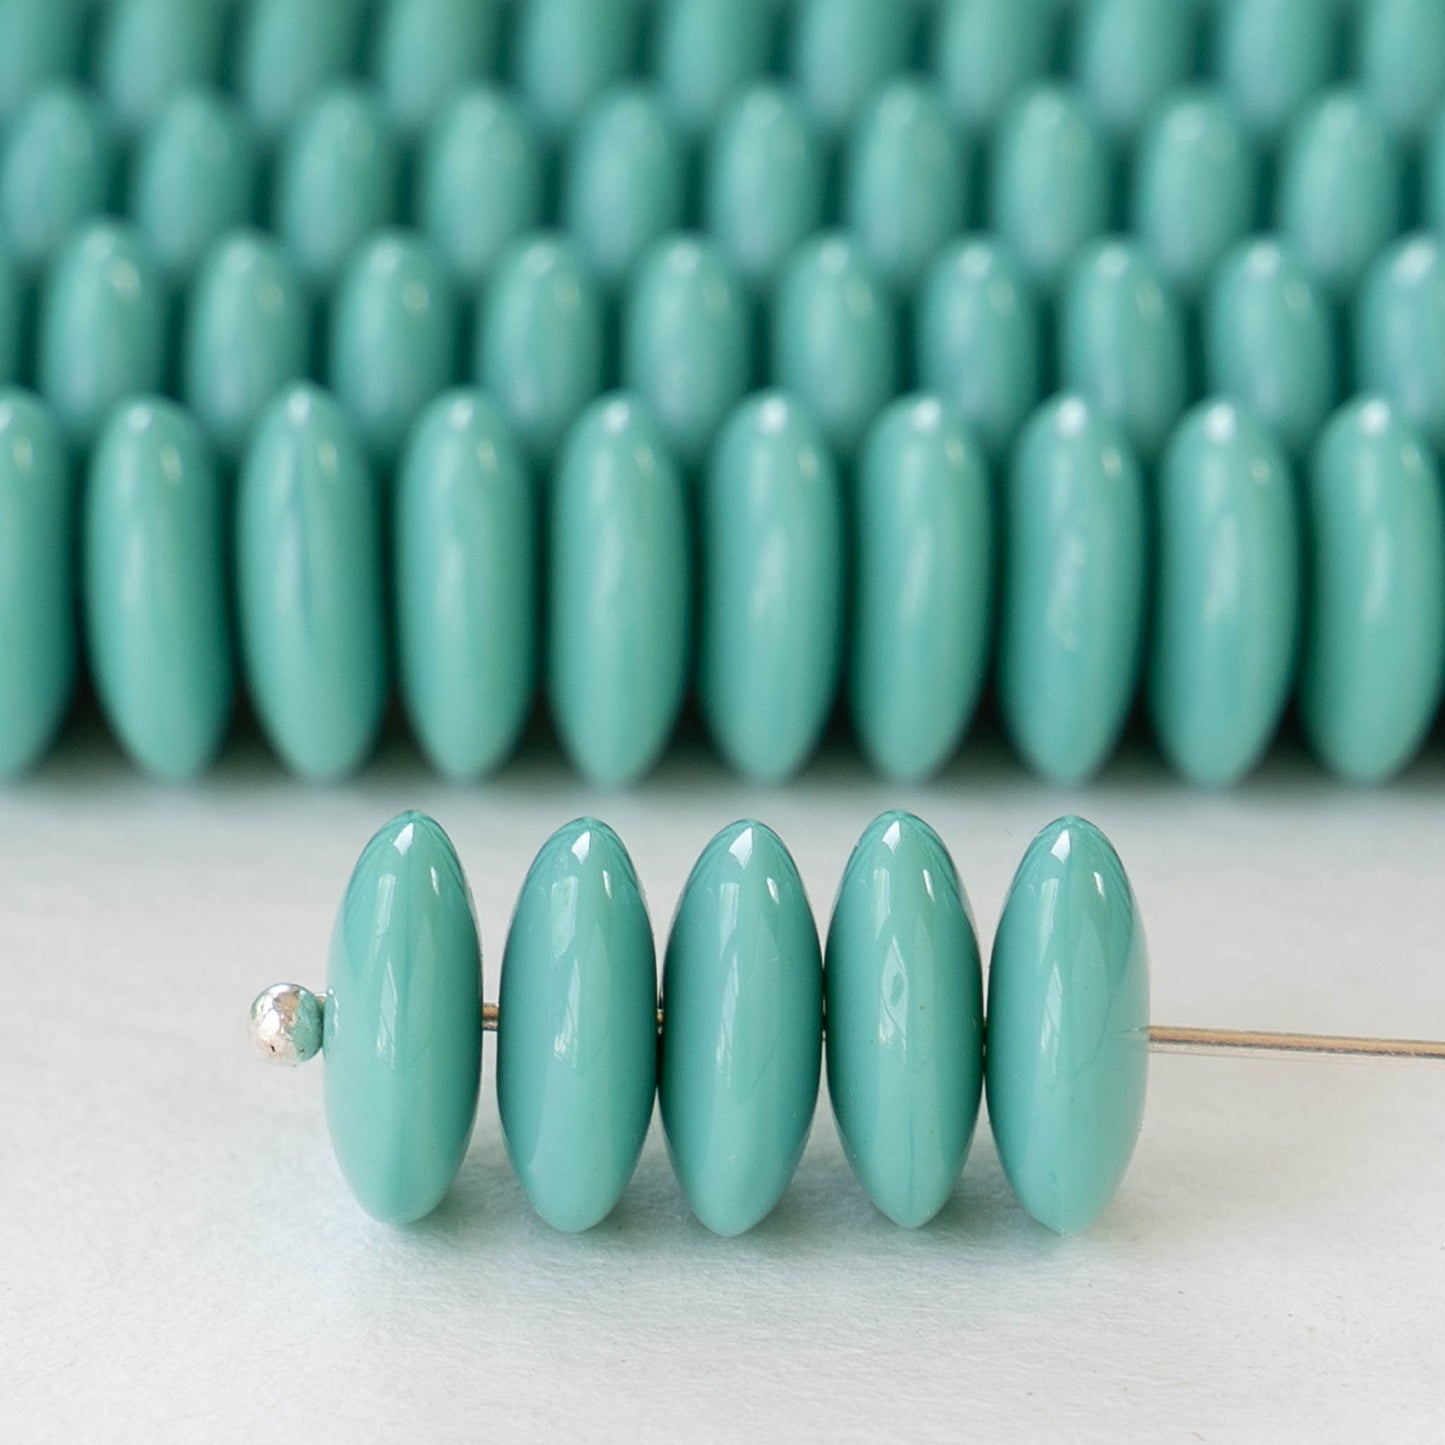 10mm Rondelle Beads - Opaque Turquoise  - 30 Beads